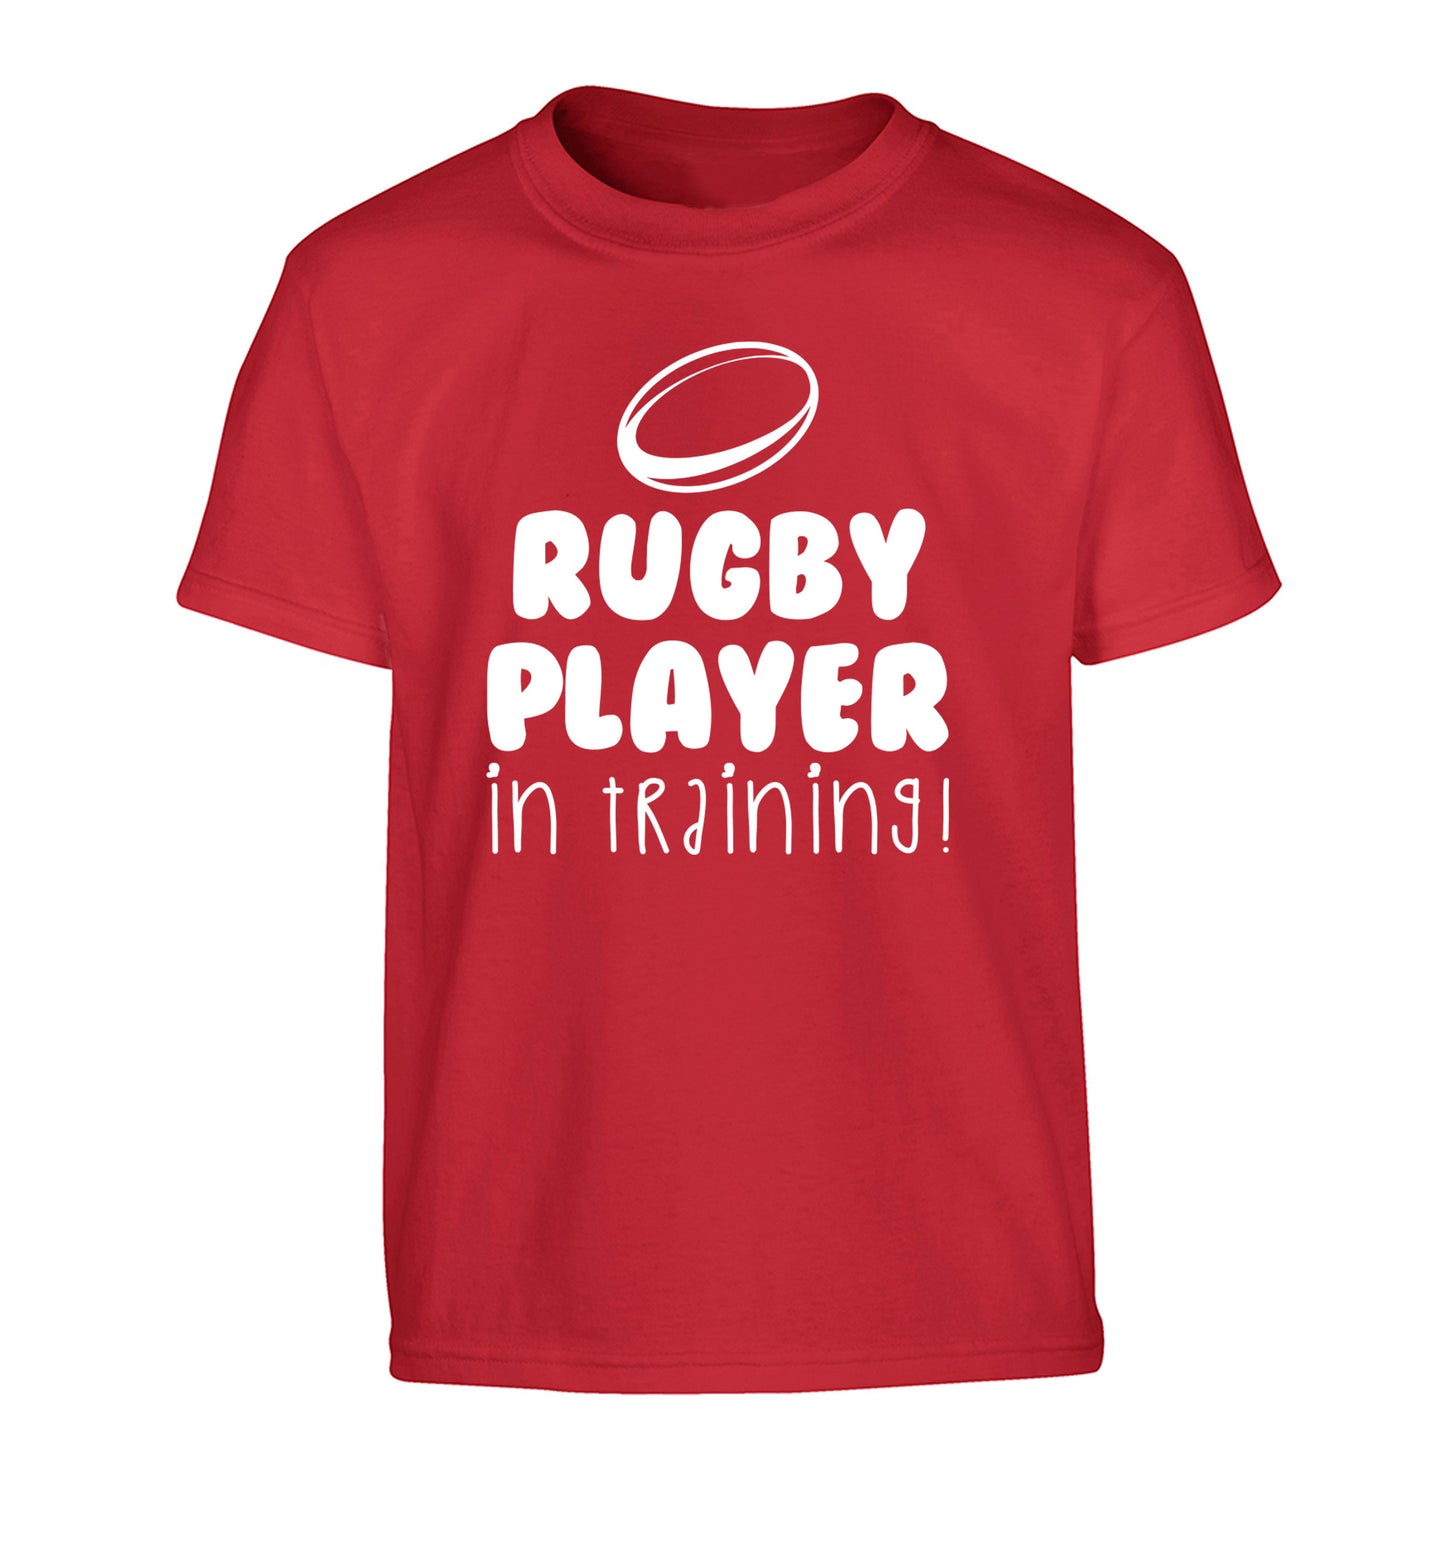 Rugby player in training Children's red Tshirt 12-14 Years